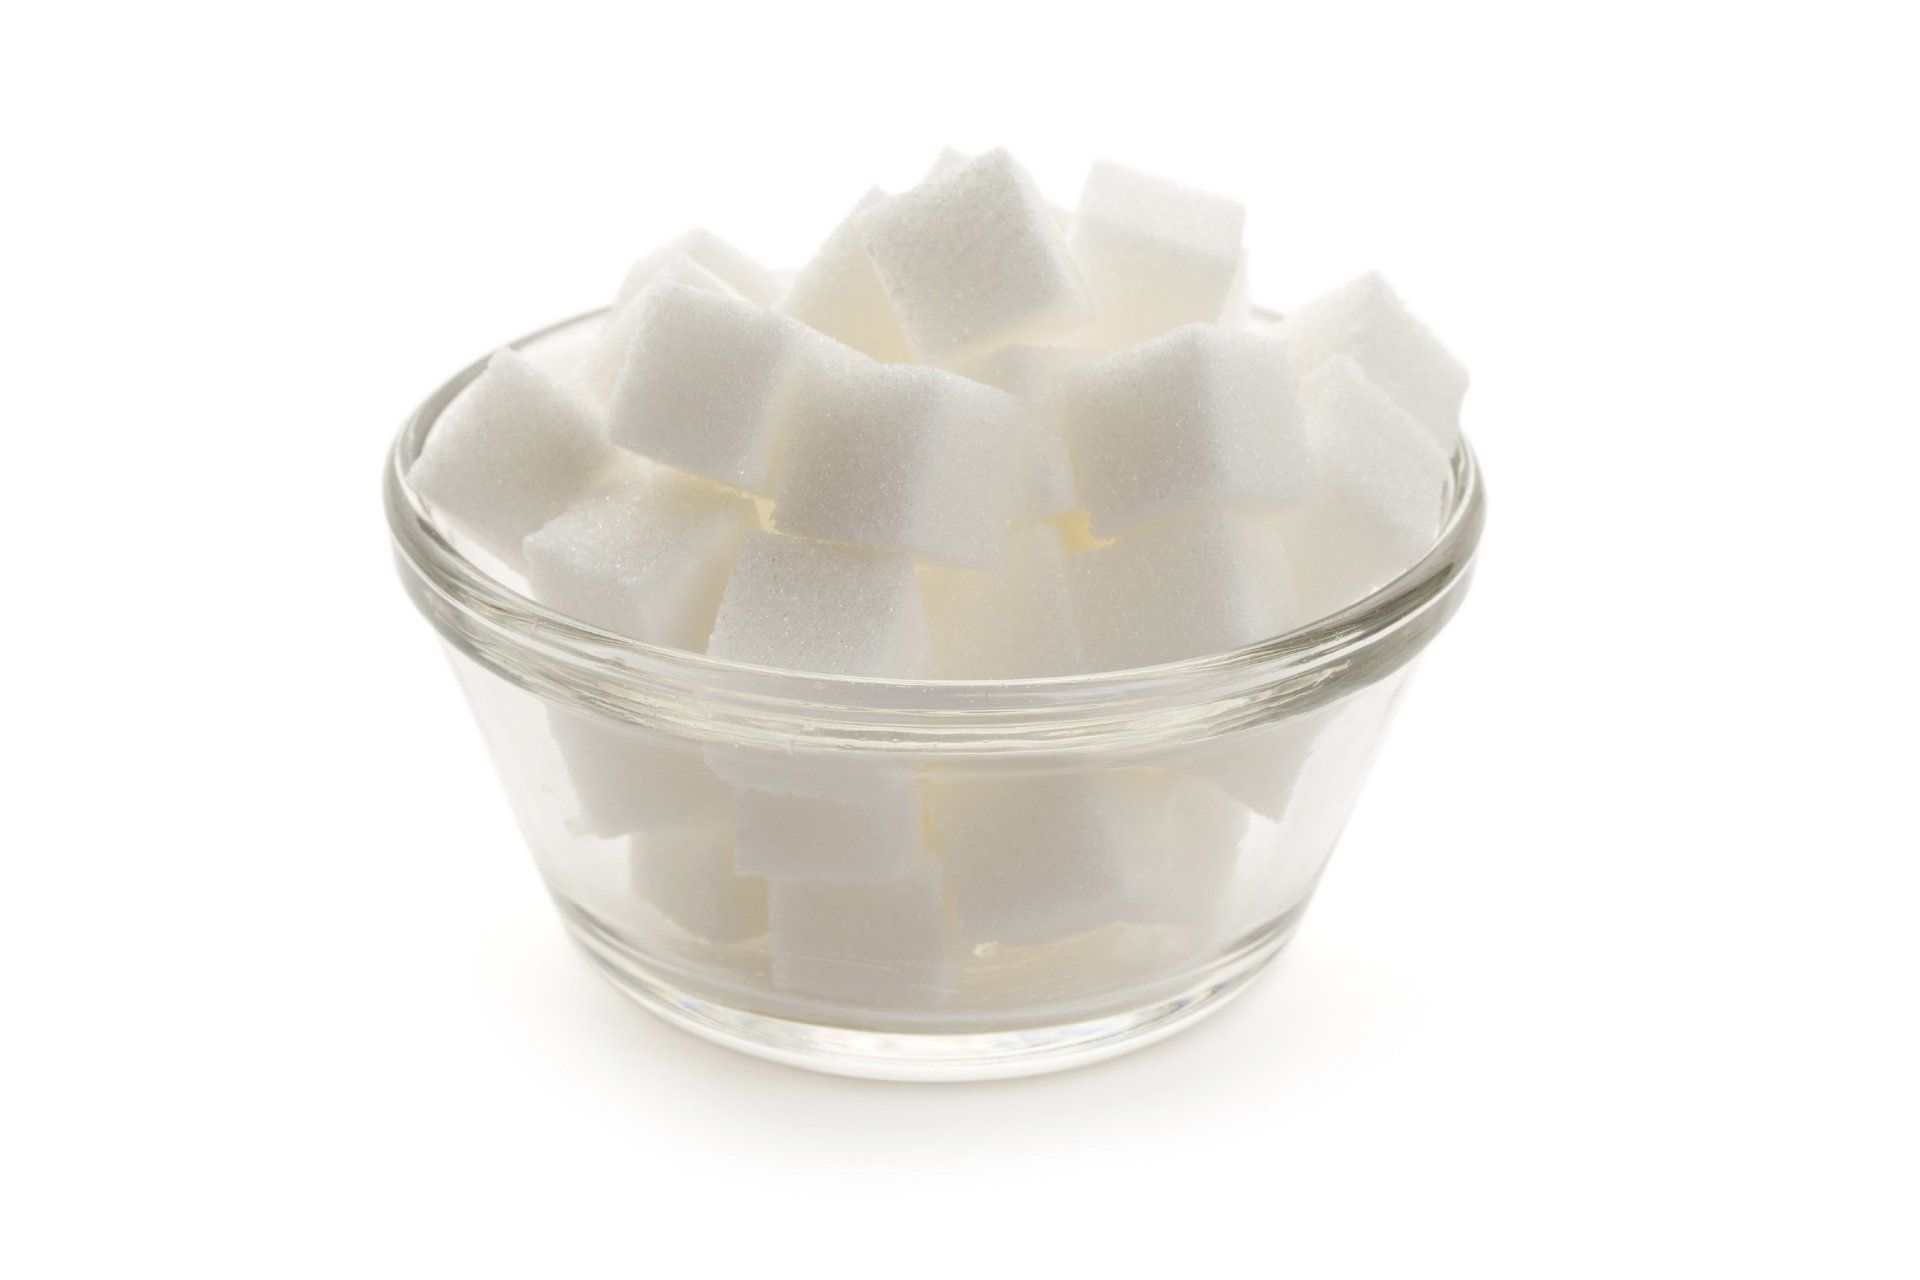 A bunch of sugar cubes in a glass bowl